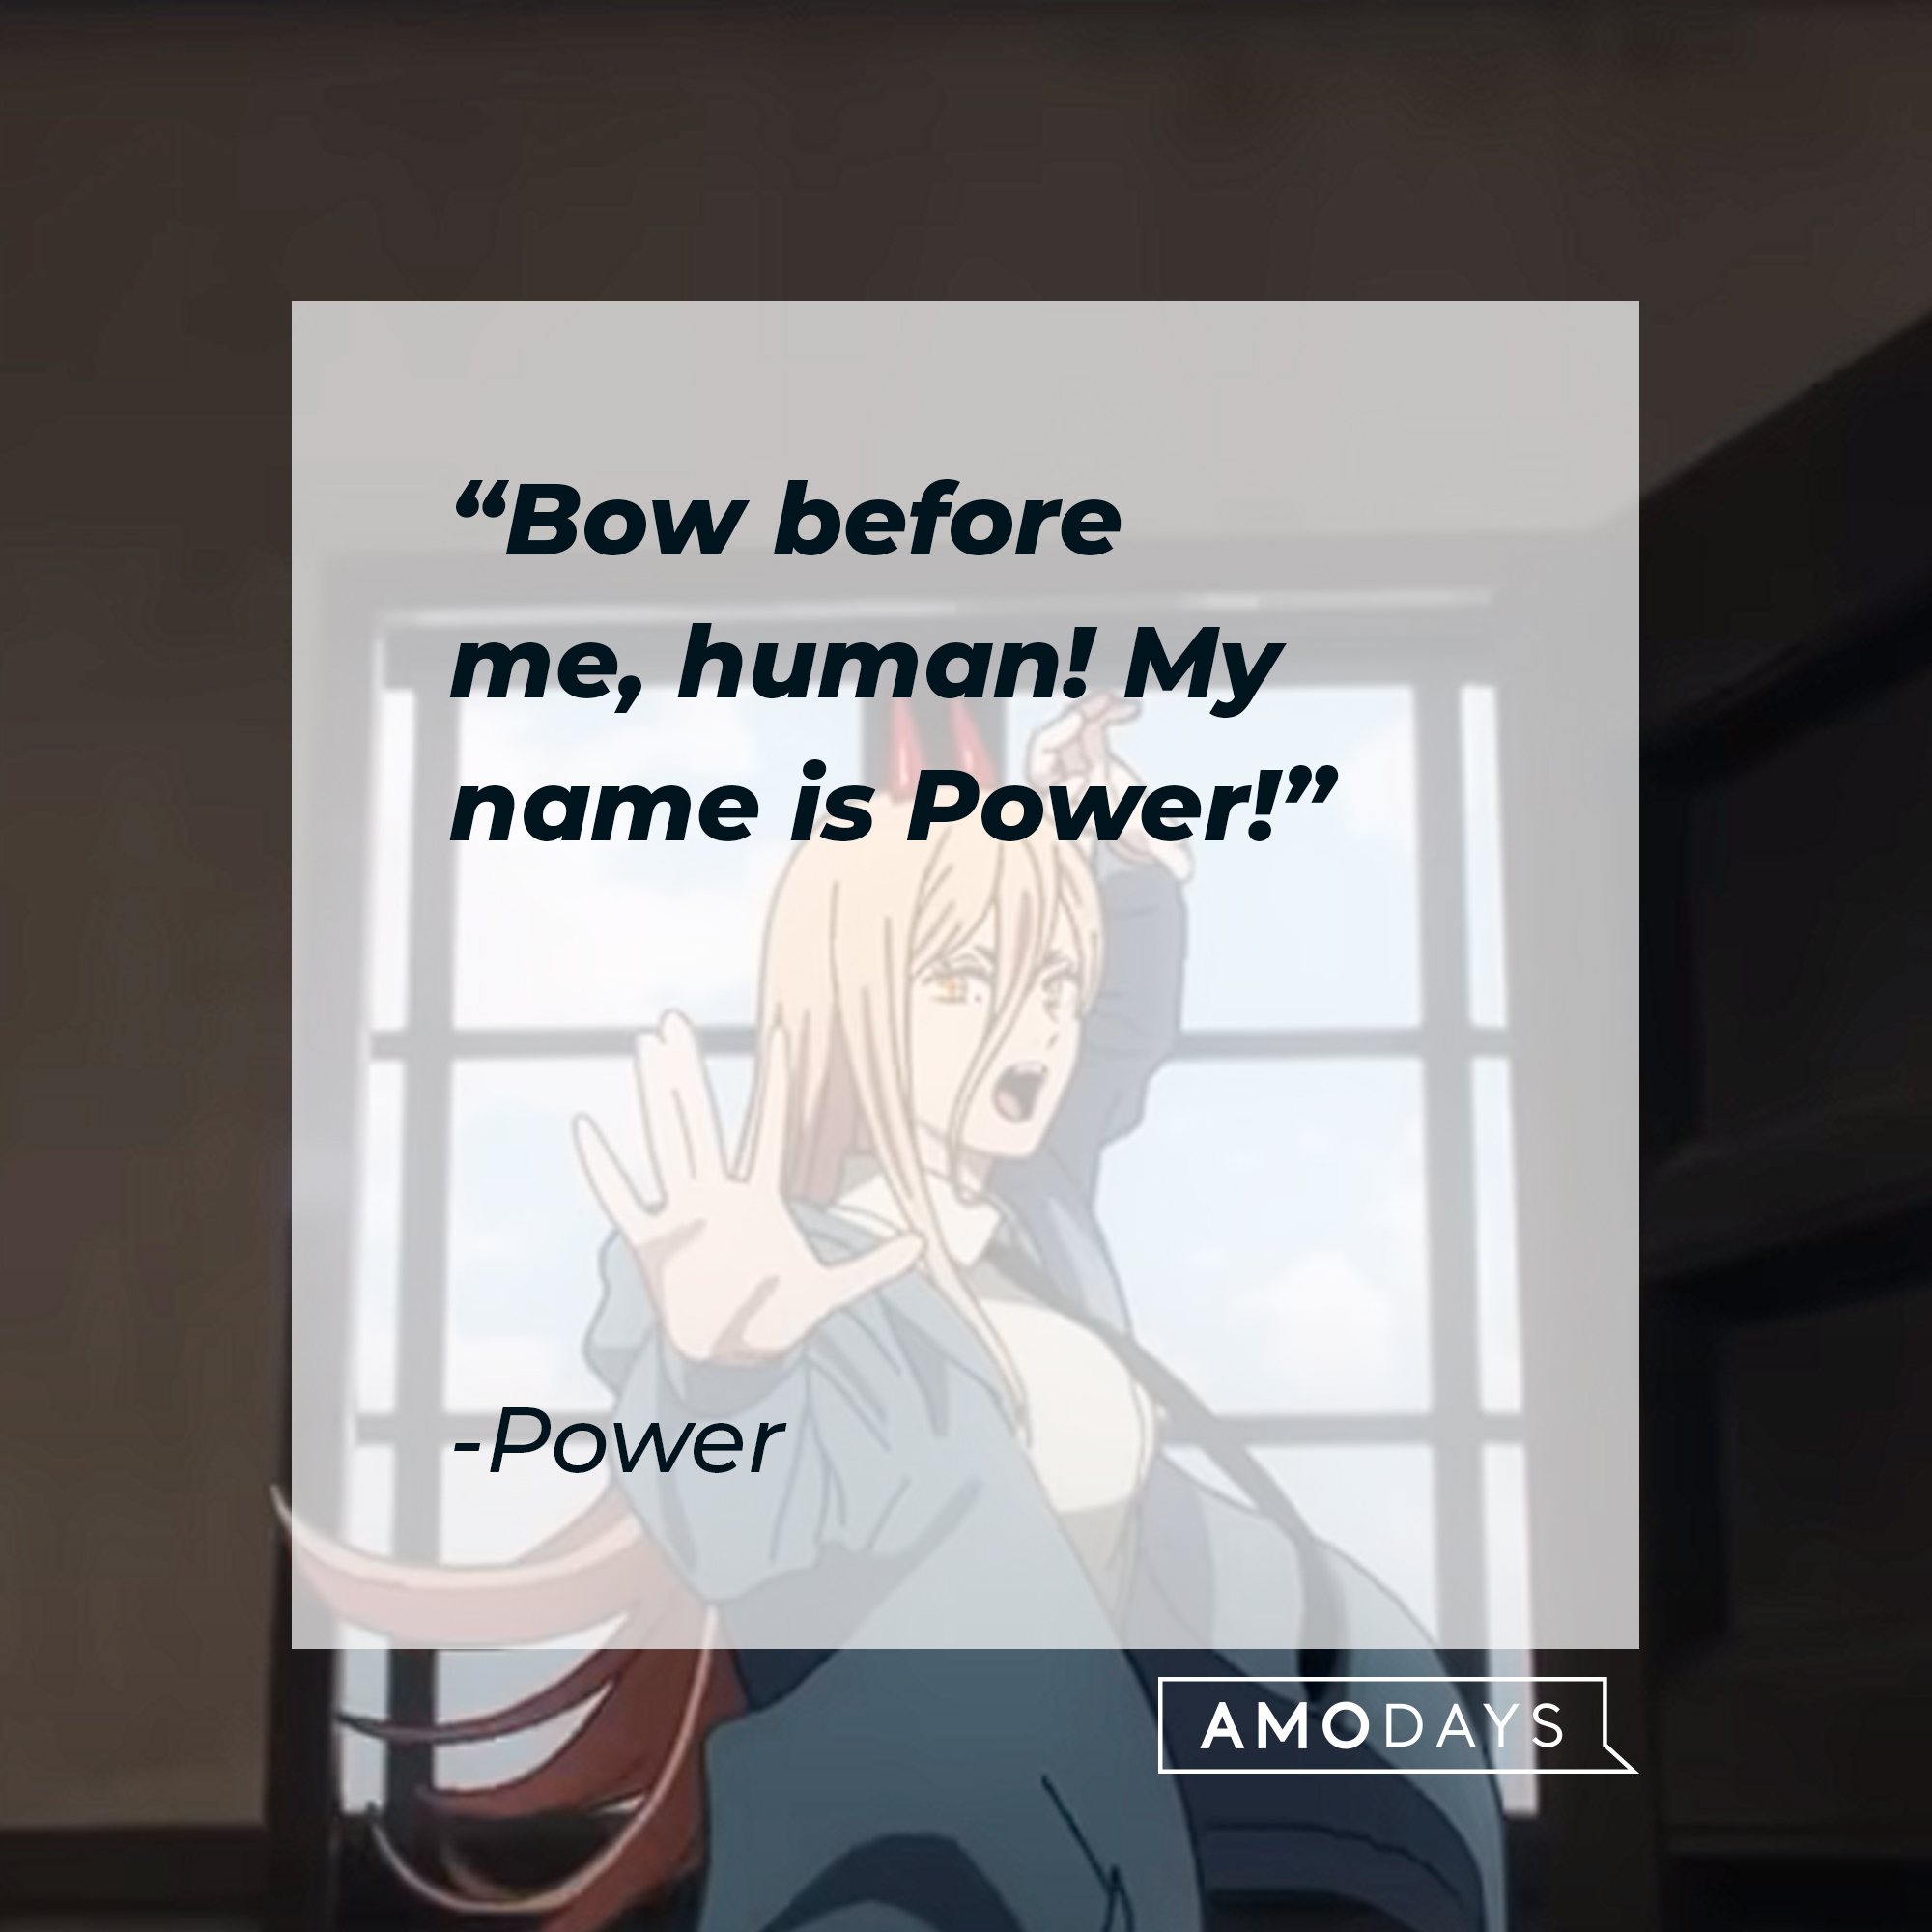 An image of Power with her quote: “Bow before me, human! My name is Power!” | Source: youtube.com/CrunchyrollCollection